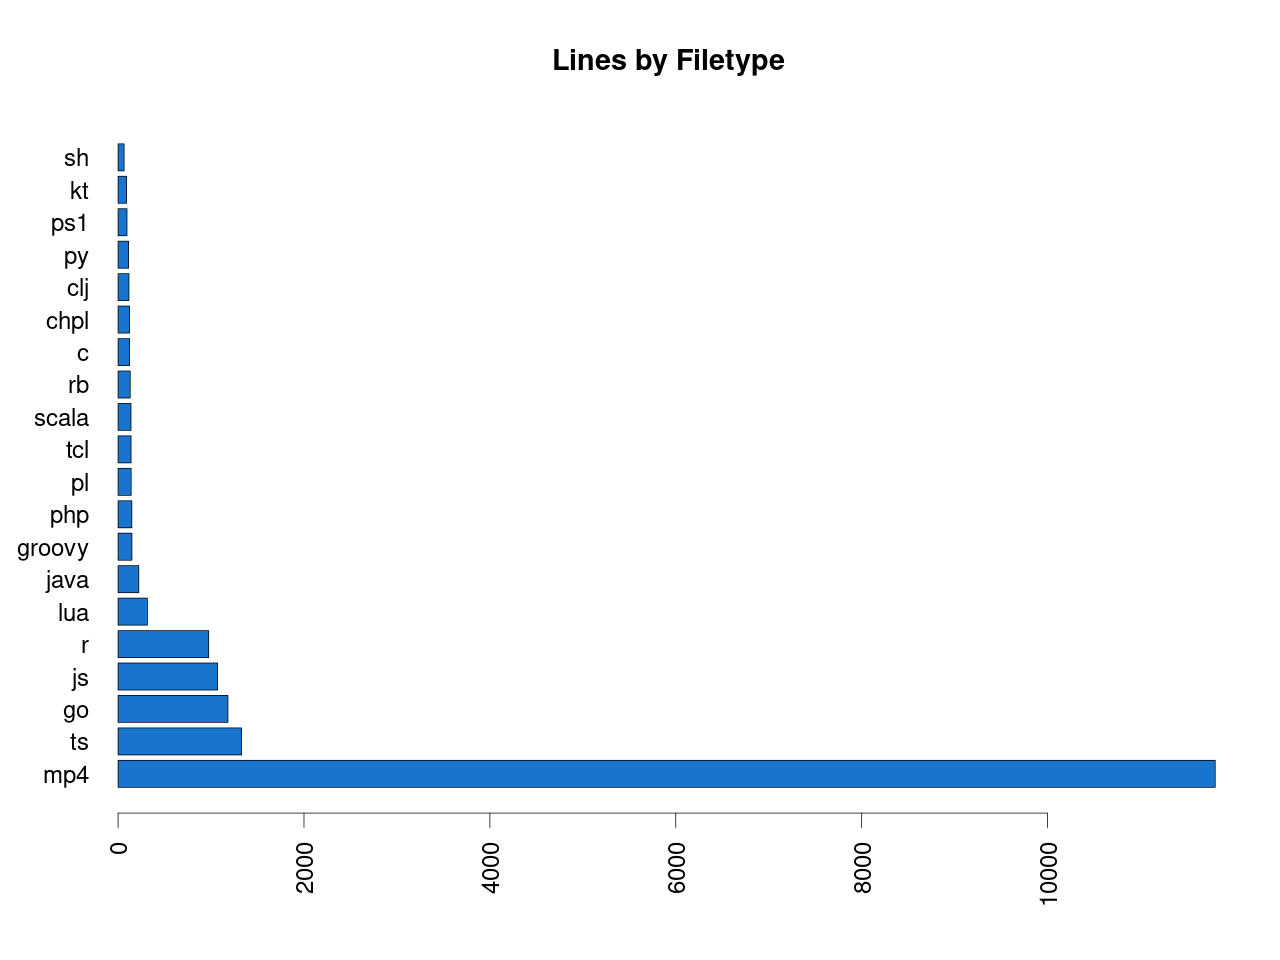 Lines by filetype